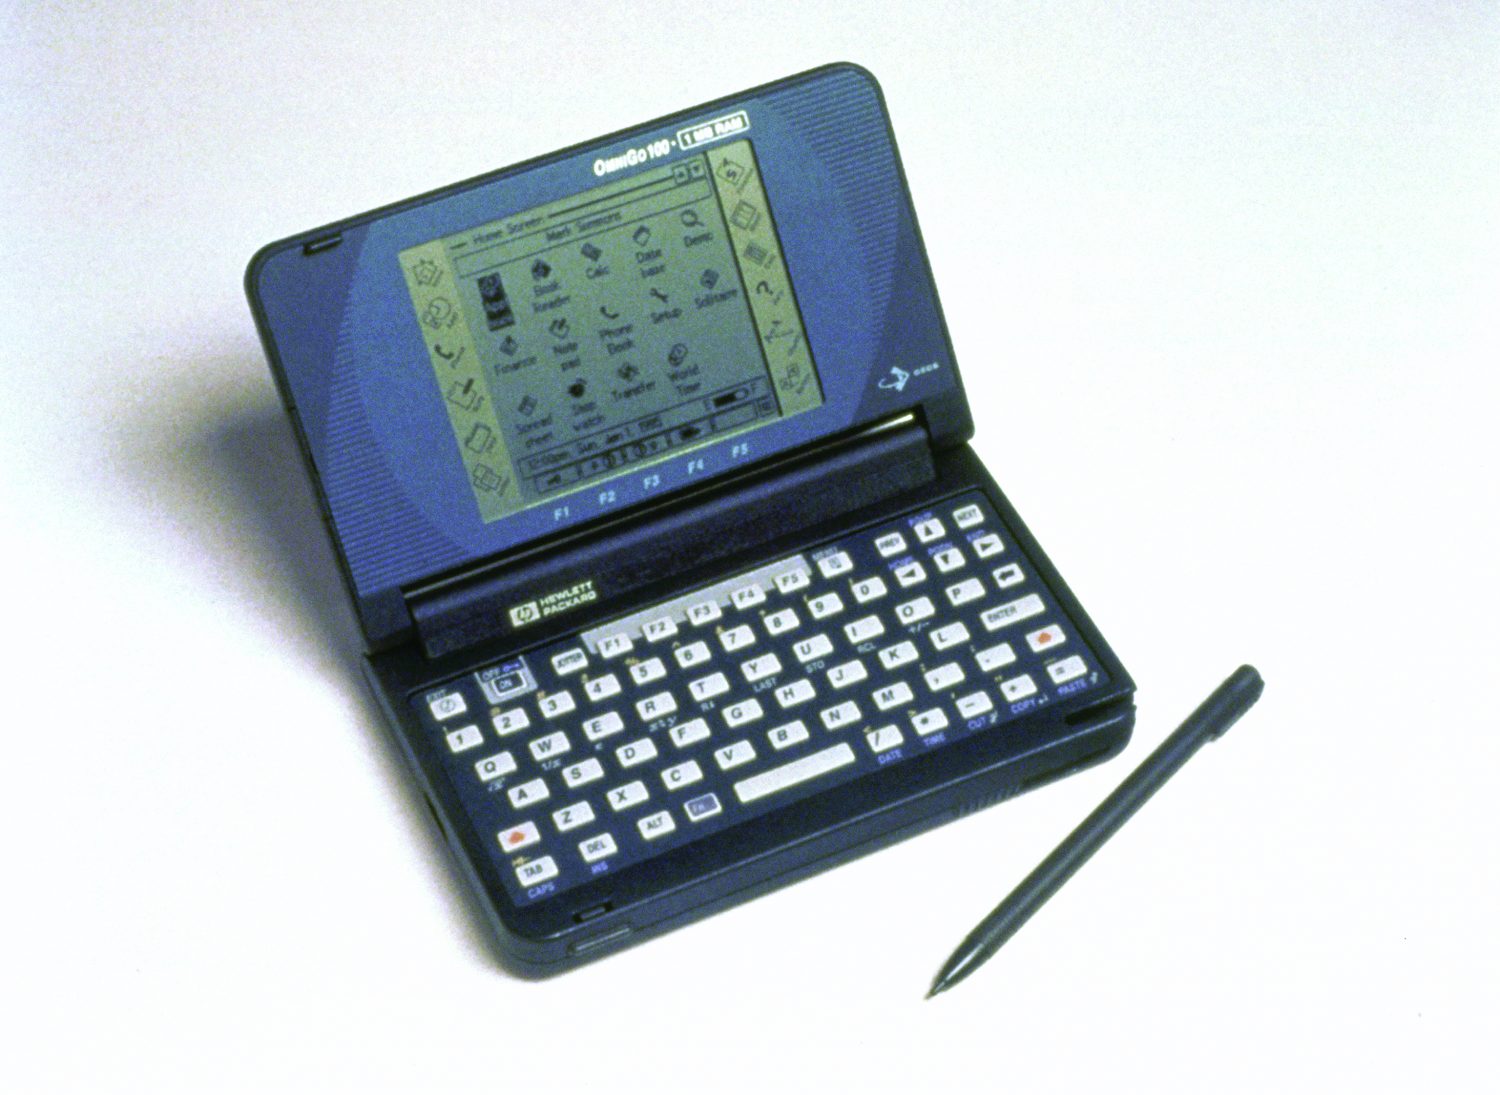 Photo of the OmniGo 100 and stylus, Hewlett-Packard's first PDA with a graphical user interface.